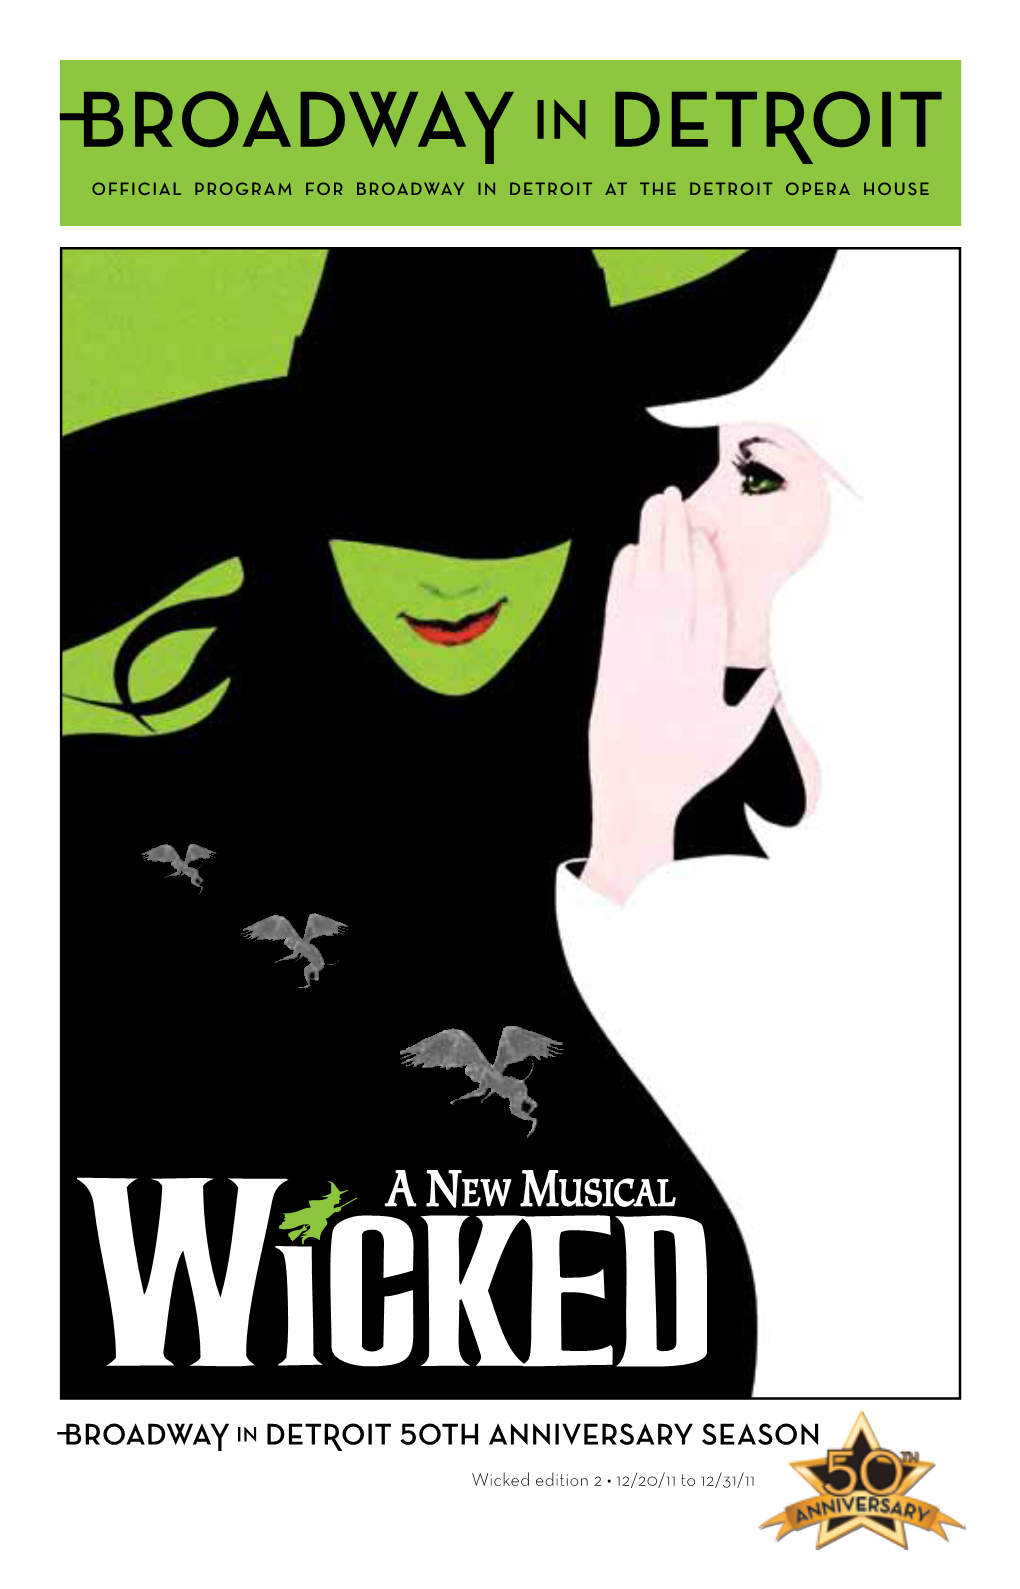 Wicked Edition 2 • 12/20/11 to 12/31/11 OFFICIAL PROGRAM FOR